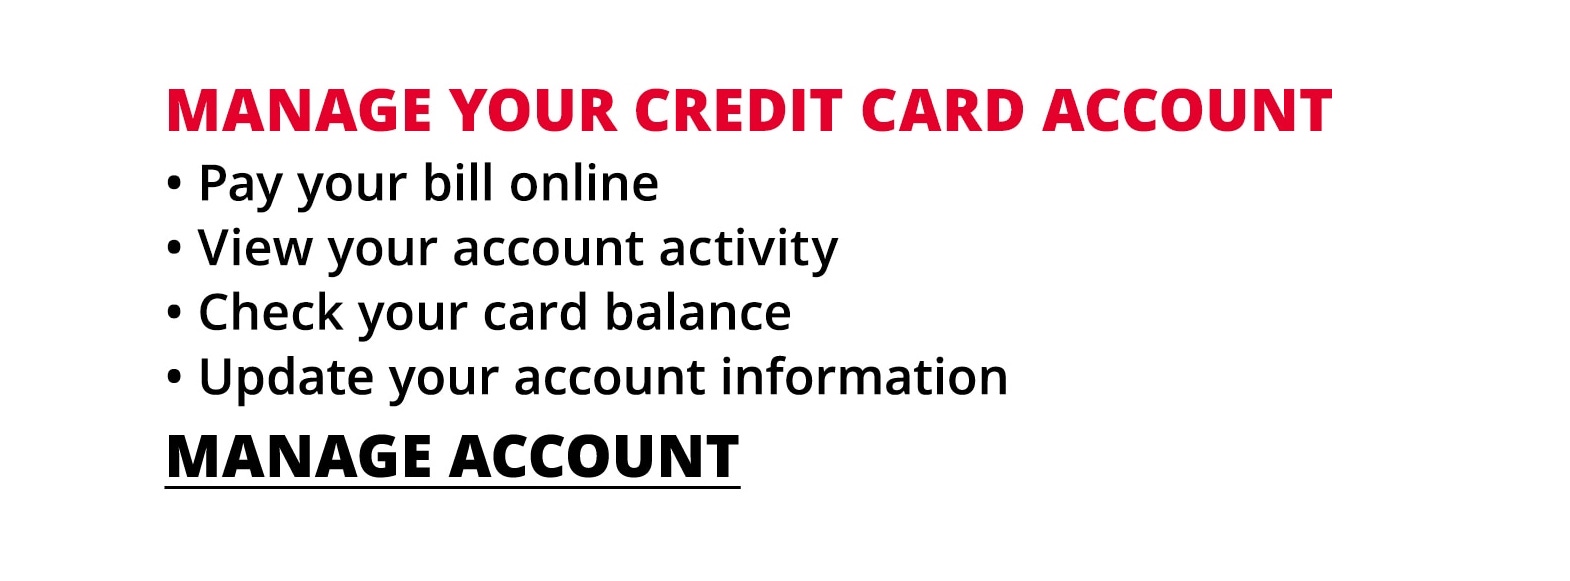 Click here to manage your account, including pay your bill online, view your account activity, check your card balance, update your account information, and more.